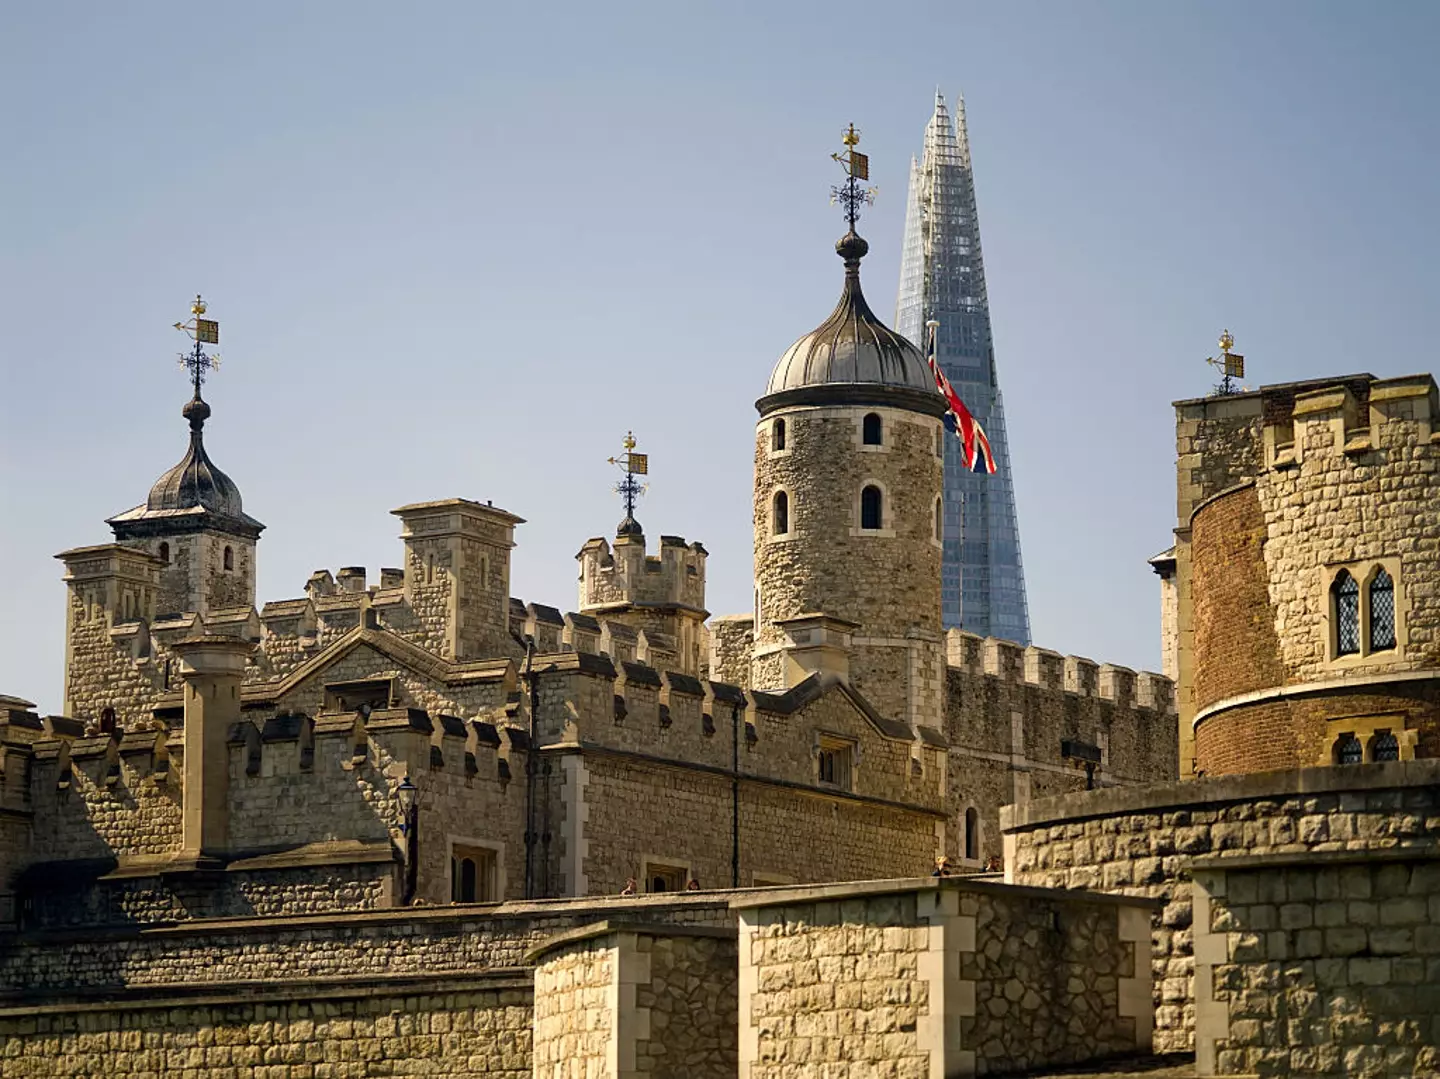 Richard Roose was swiftly arrested and taken to the Tower of London where he would be tortured for information. (Getty Images)